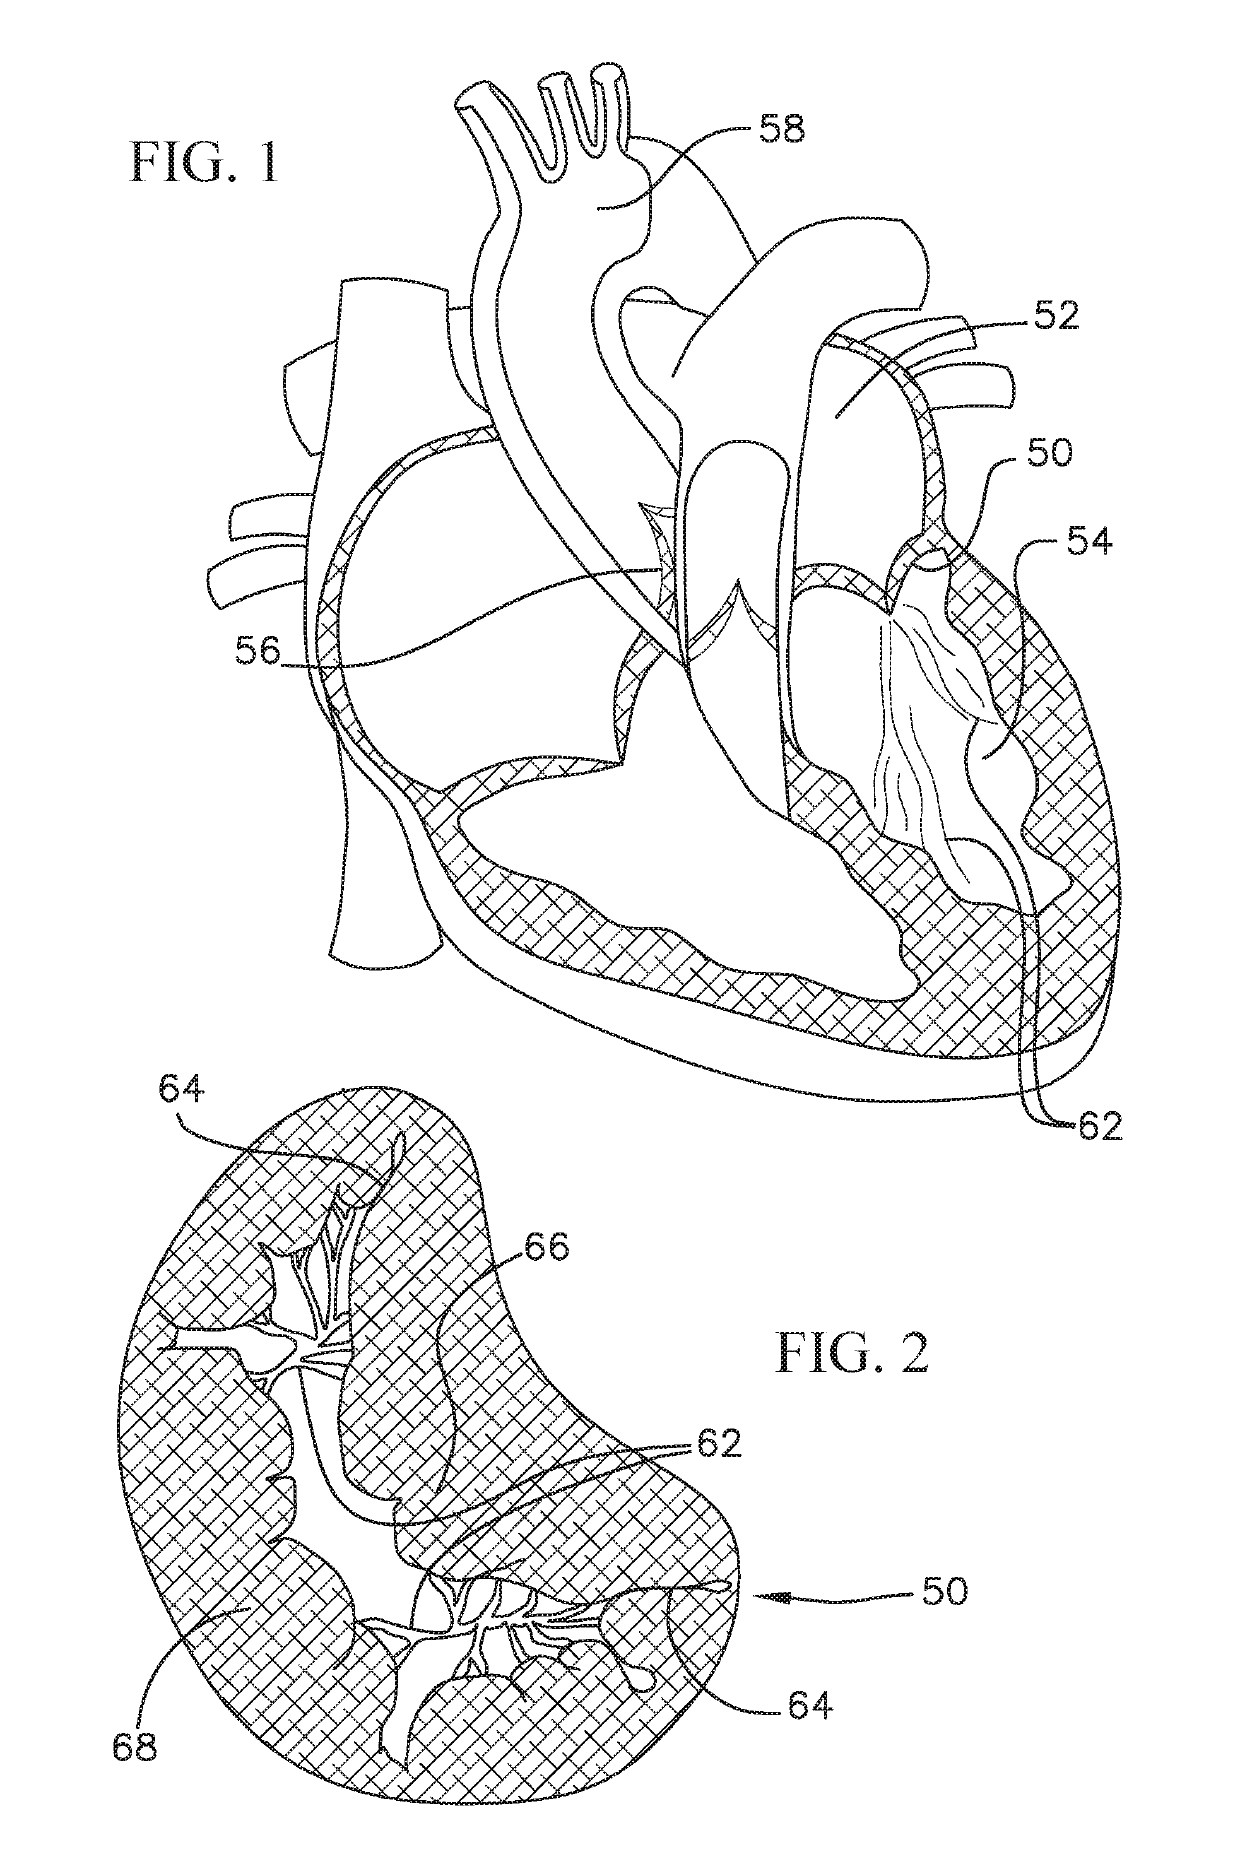 Heart valve docking coils and systems